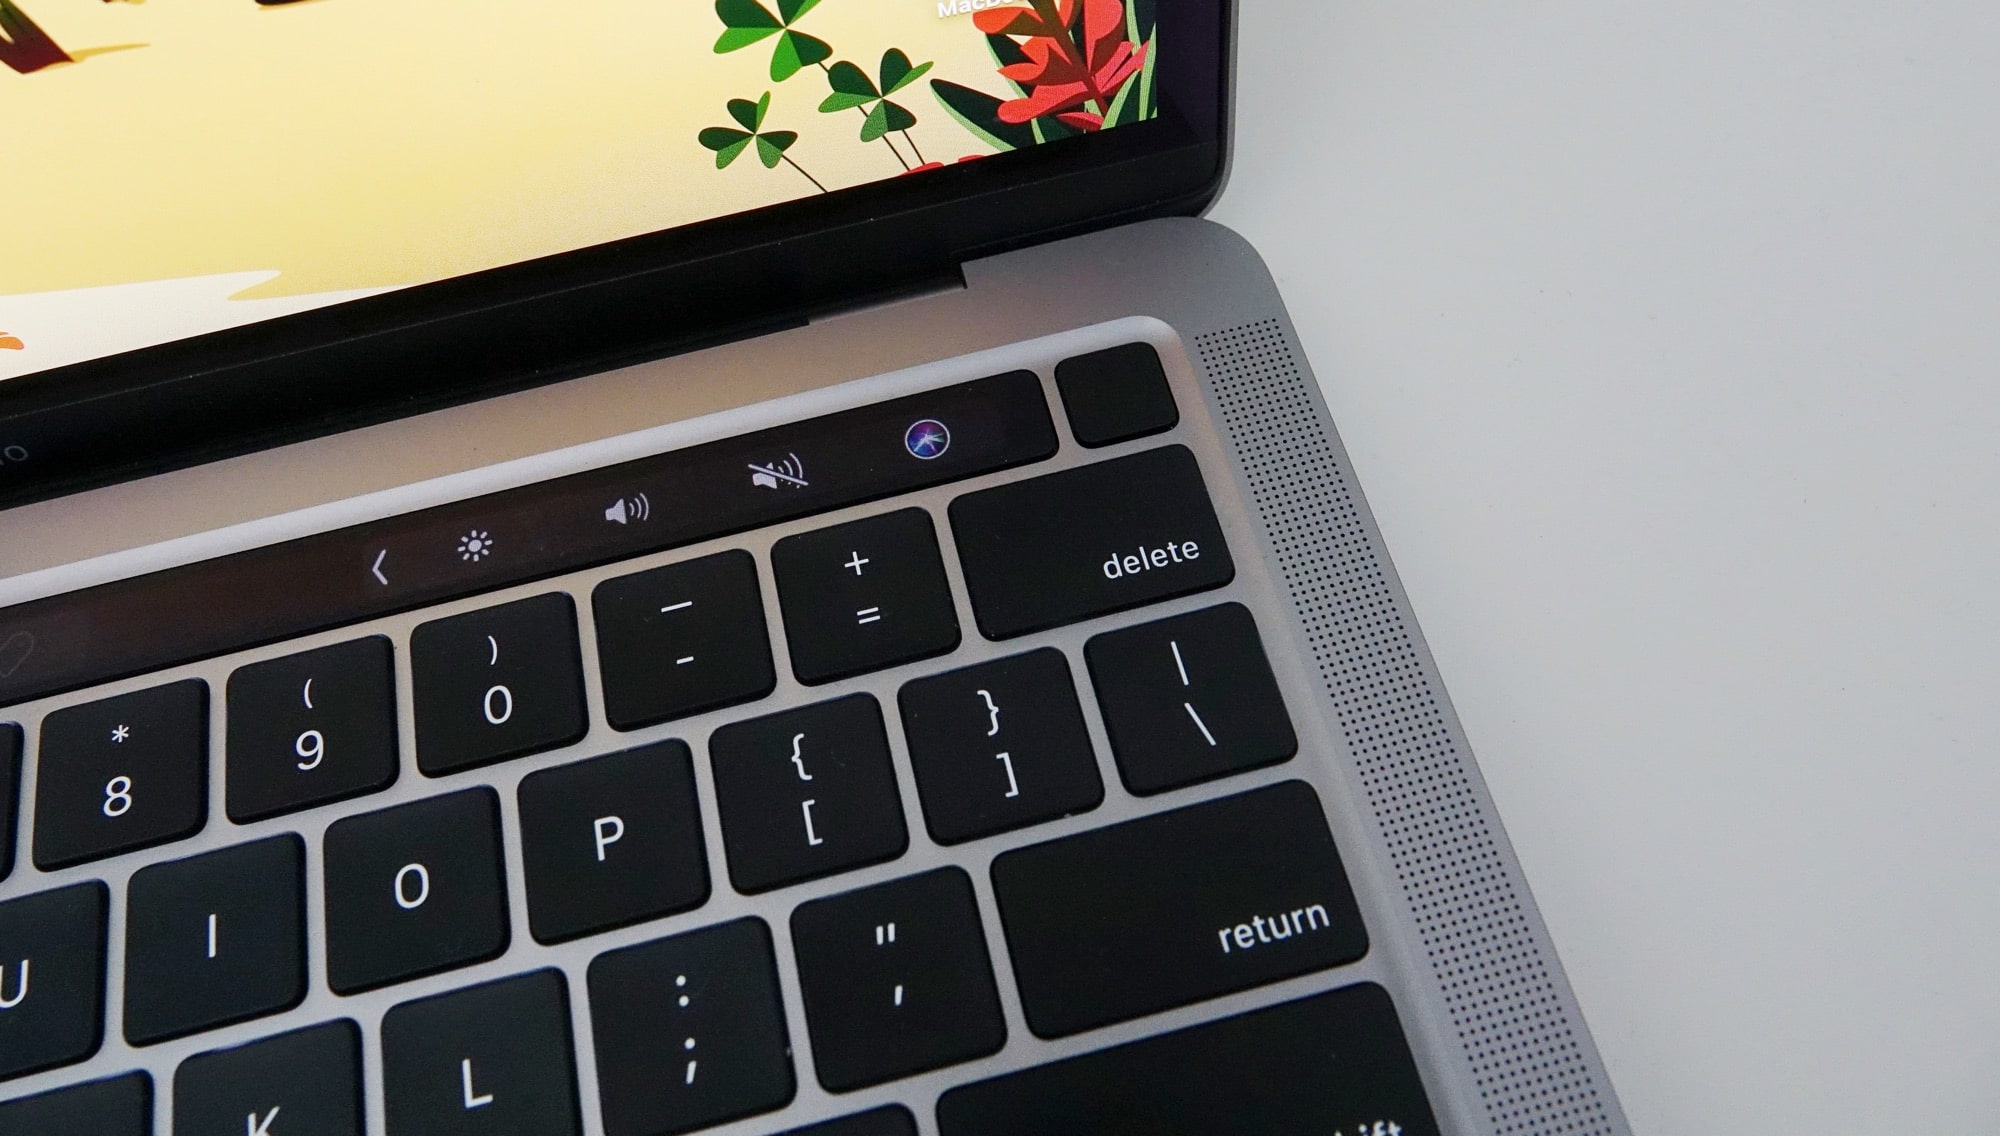 The fingerprint sensor next to the OLED Touch Bar on the 13 inch M1 MBP